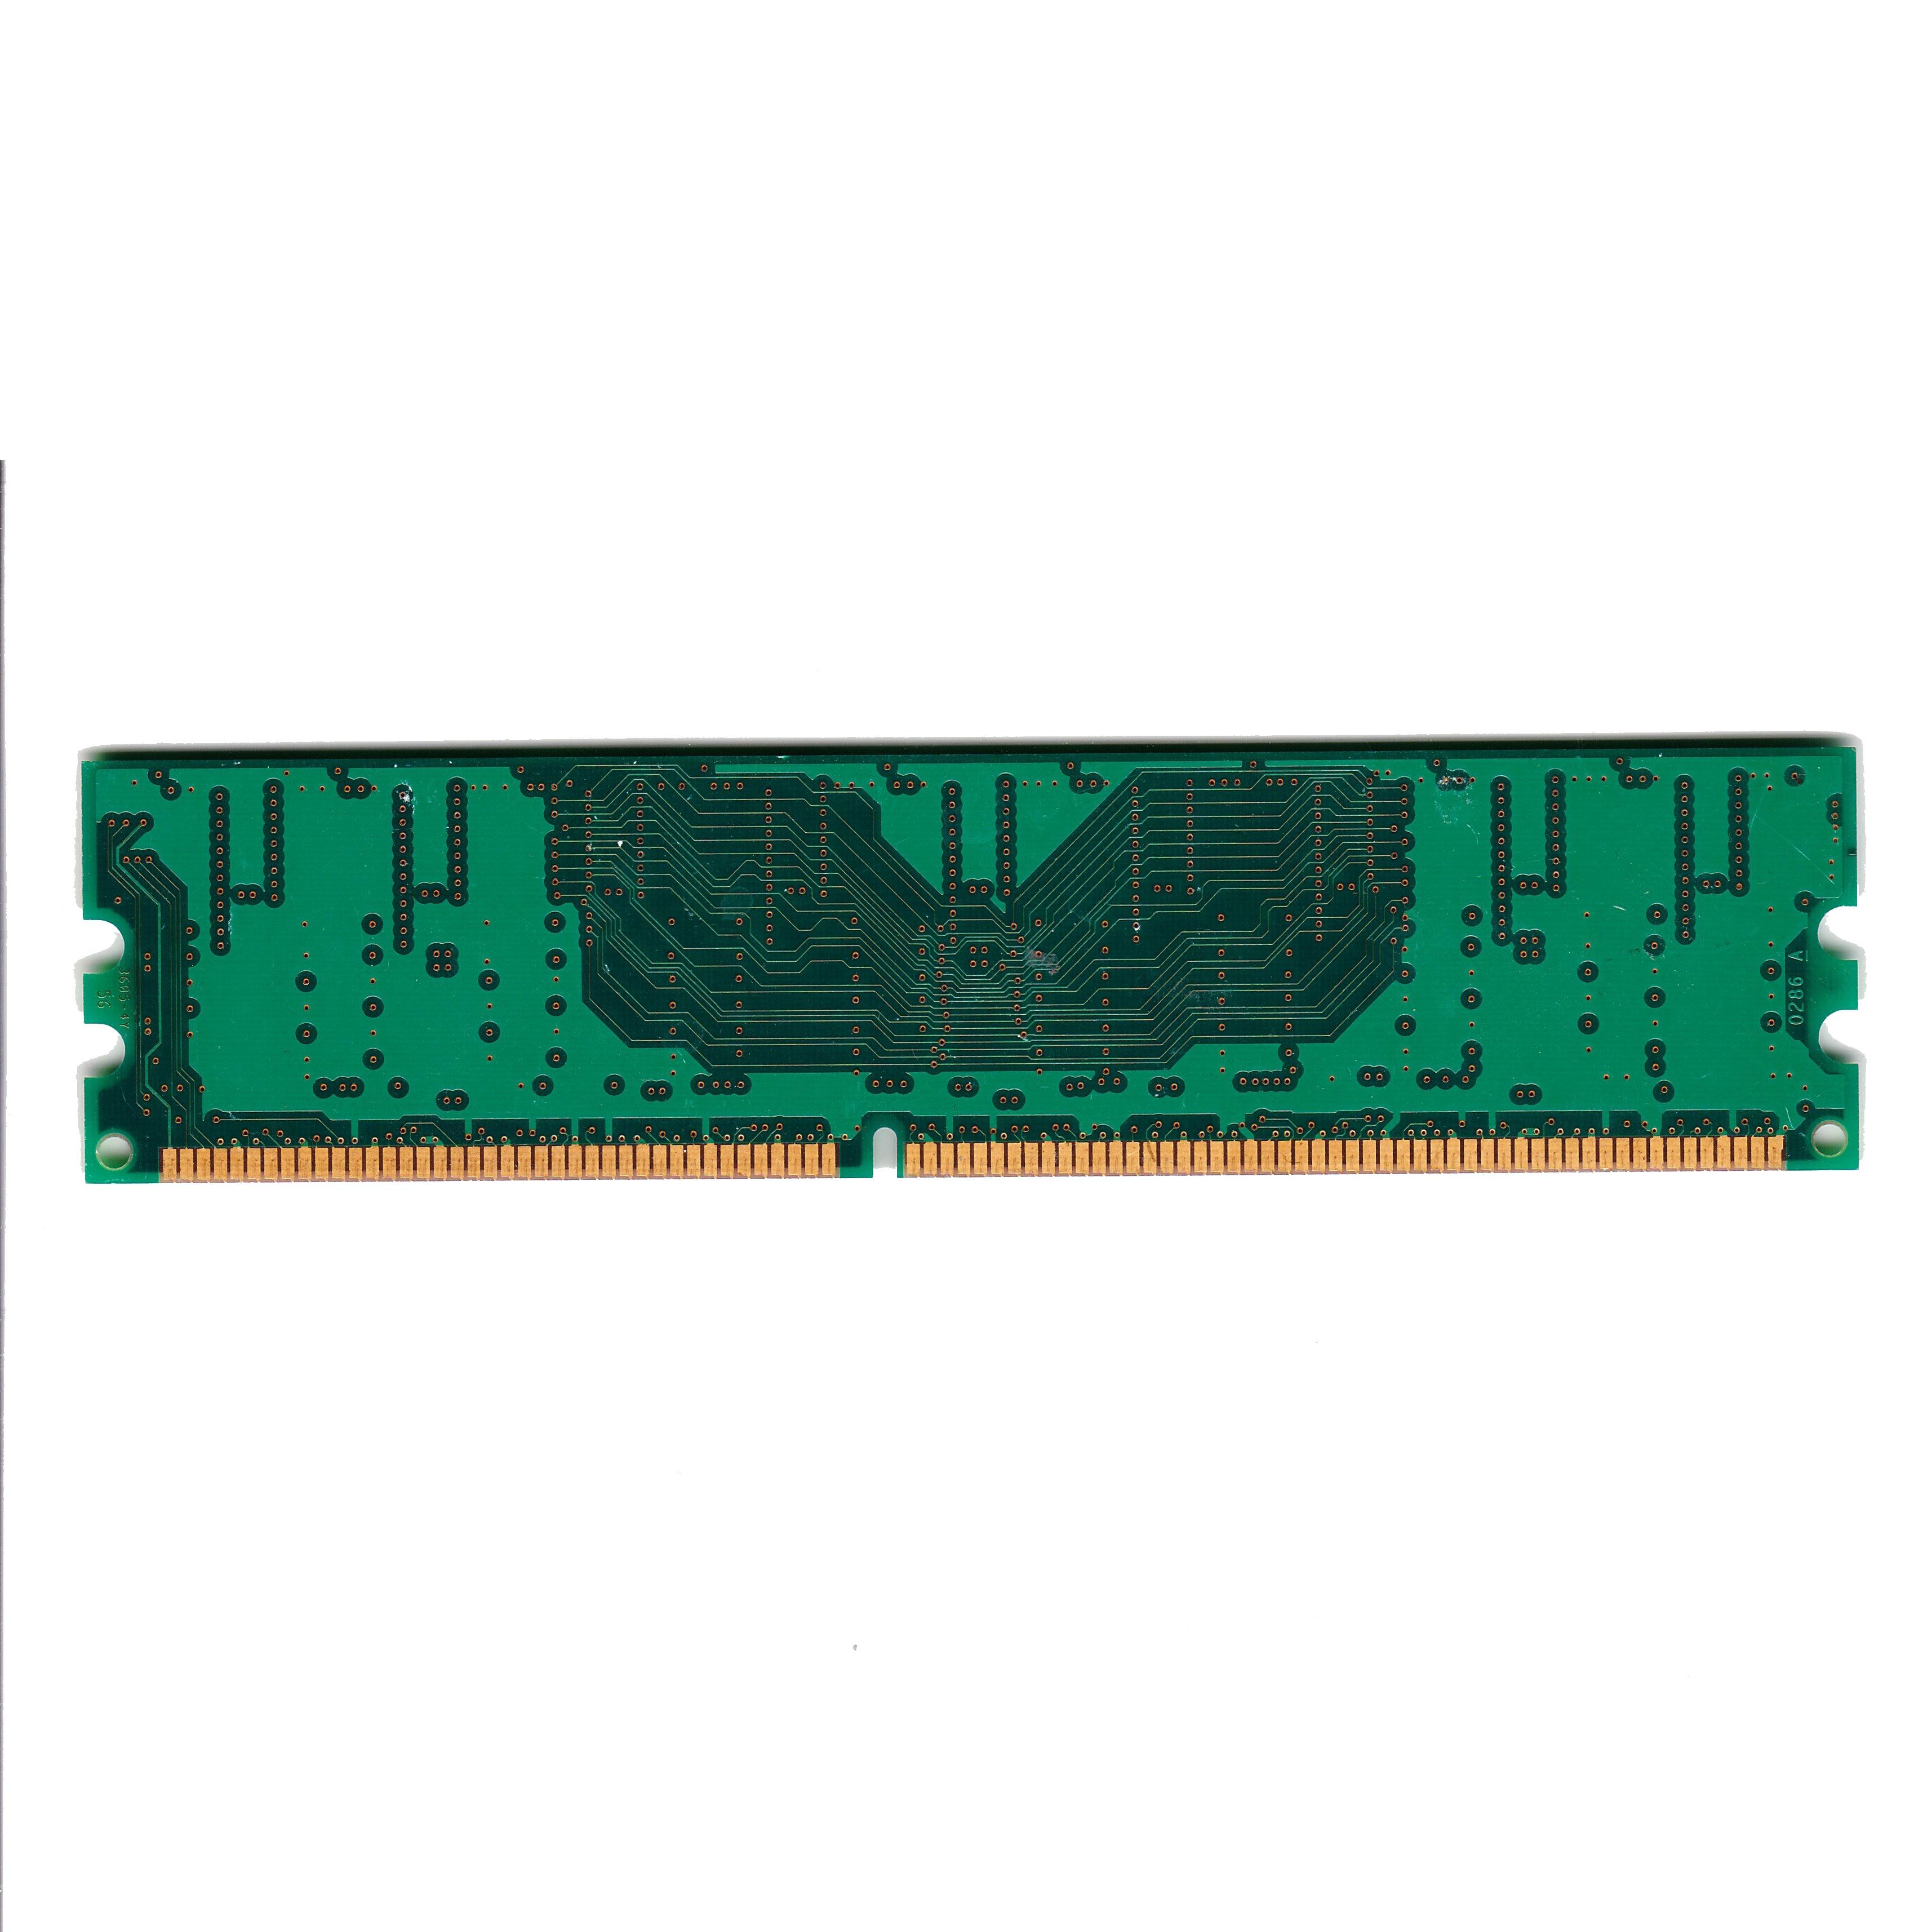 Untested MT8VDDT326AY 40BG4 256MB DDR2 - Great Price, Great Performance!